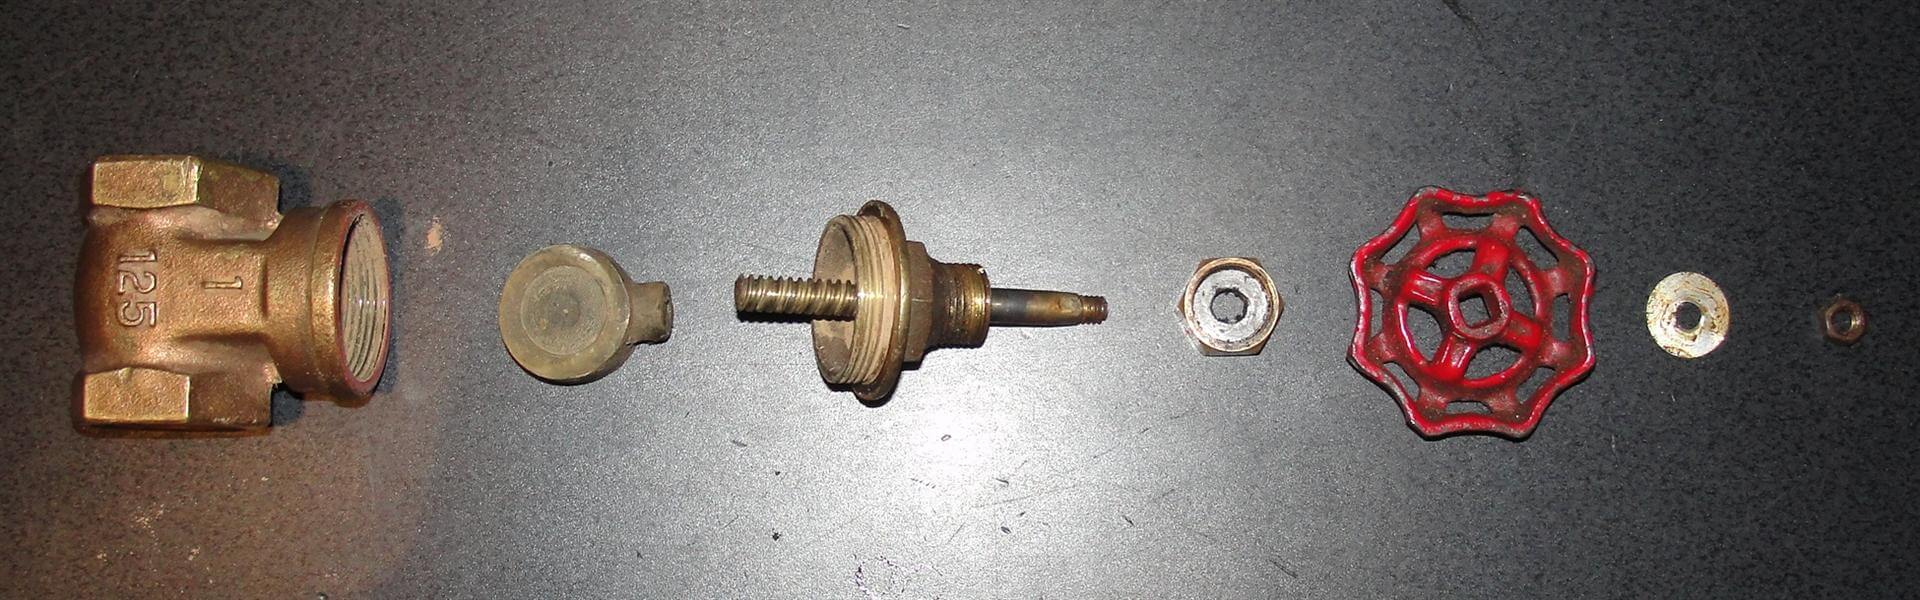 Lot of 2 COB Water-Gate Water Shut Off Tool for Valve Replacement 